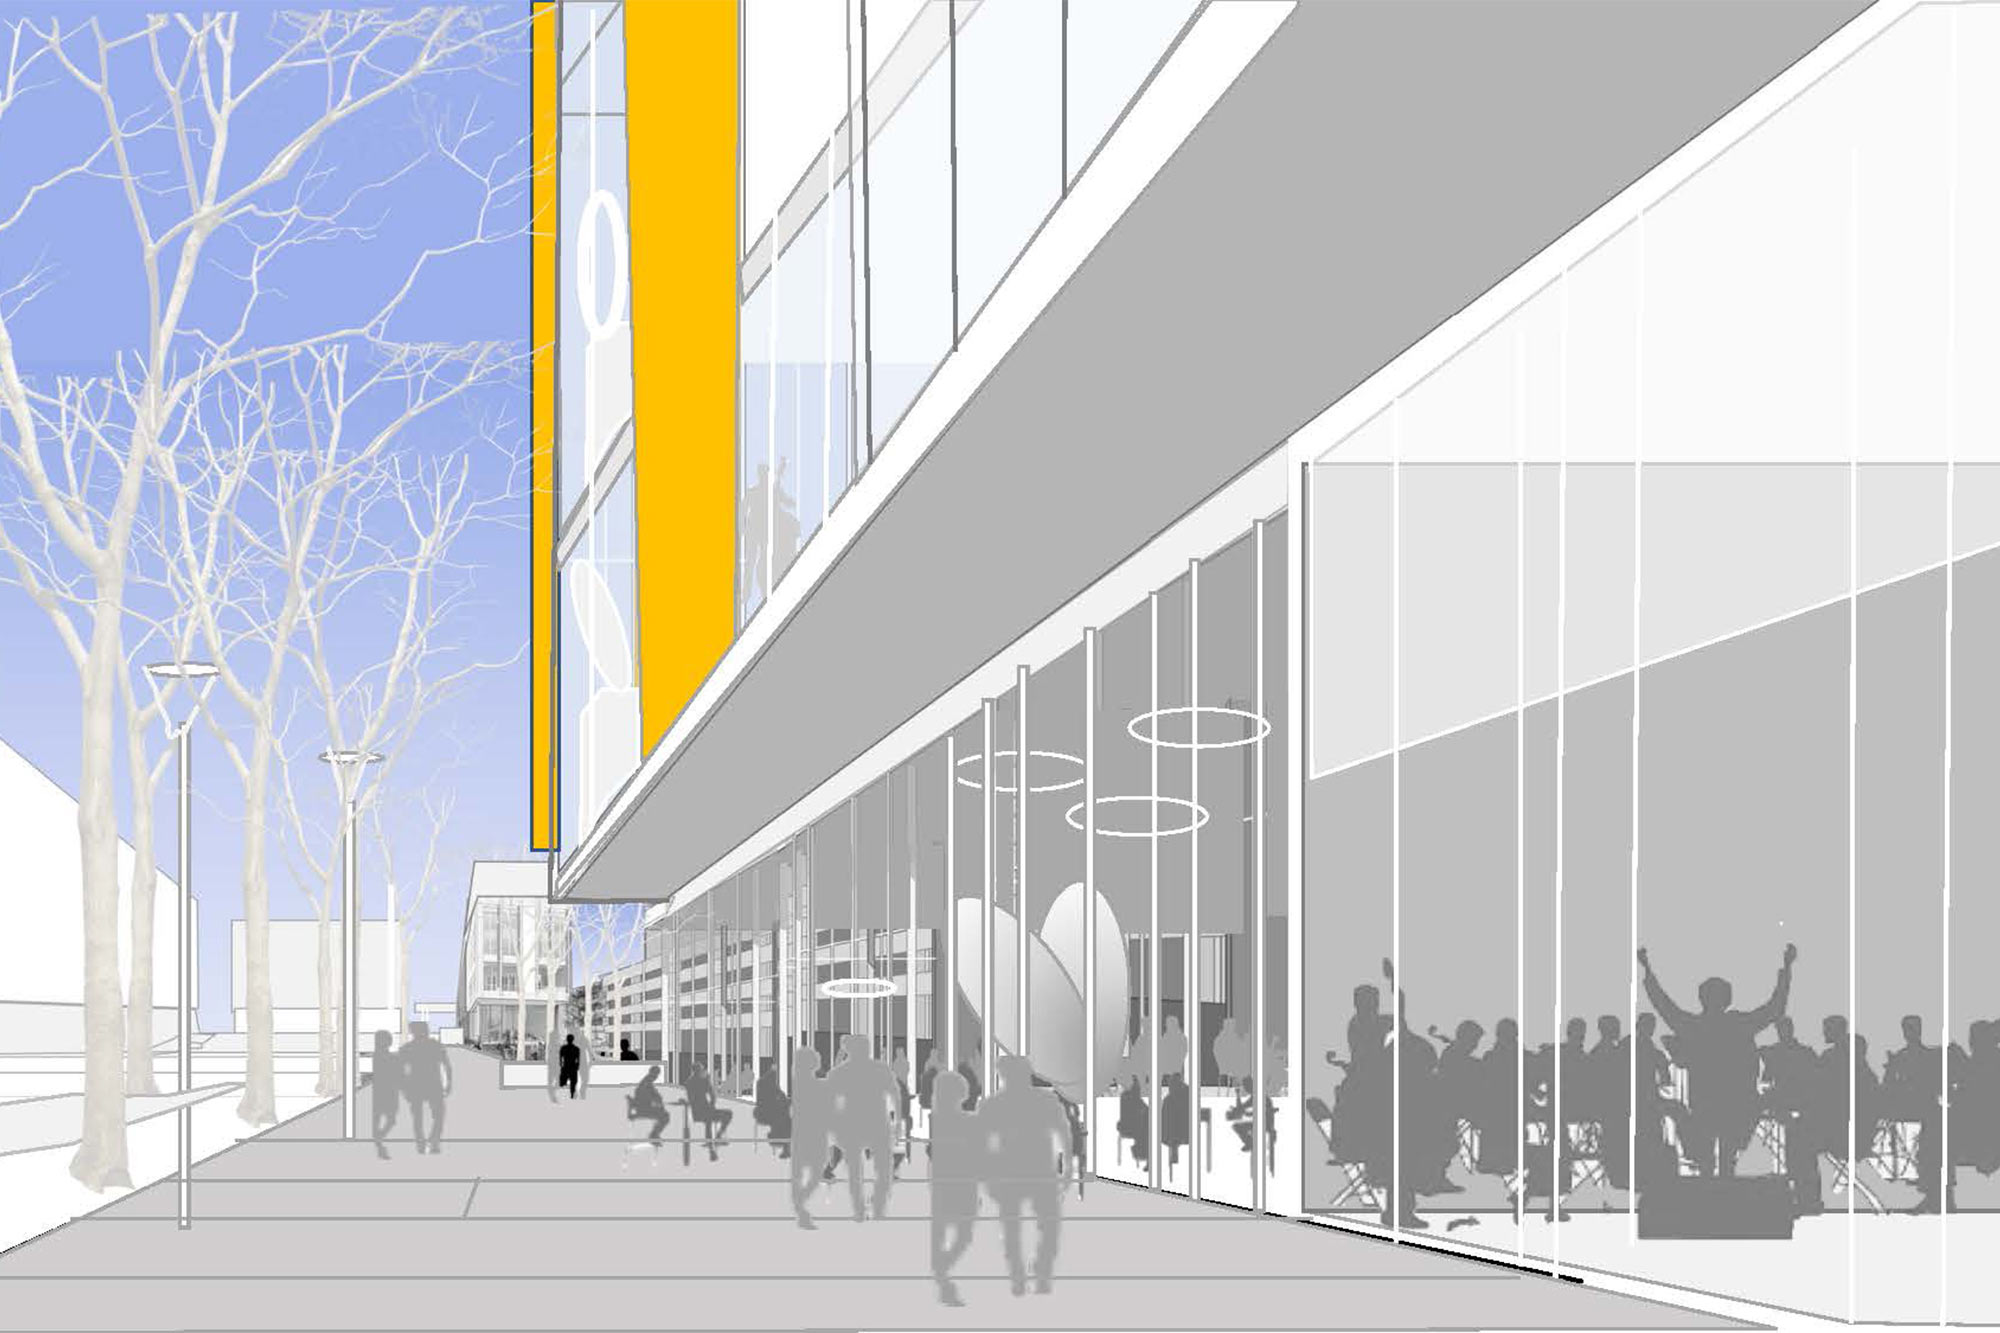 An illustration of the future performing arts center in the Emmet-Ivy Corridor. The illustration shows a walkway next to a two-story building with floor-to-ceiling windows.